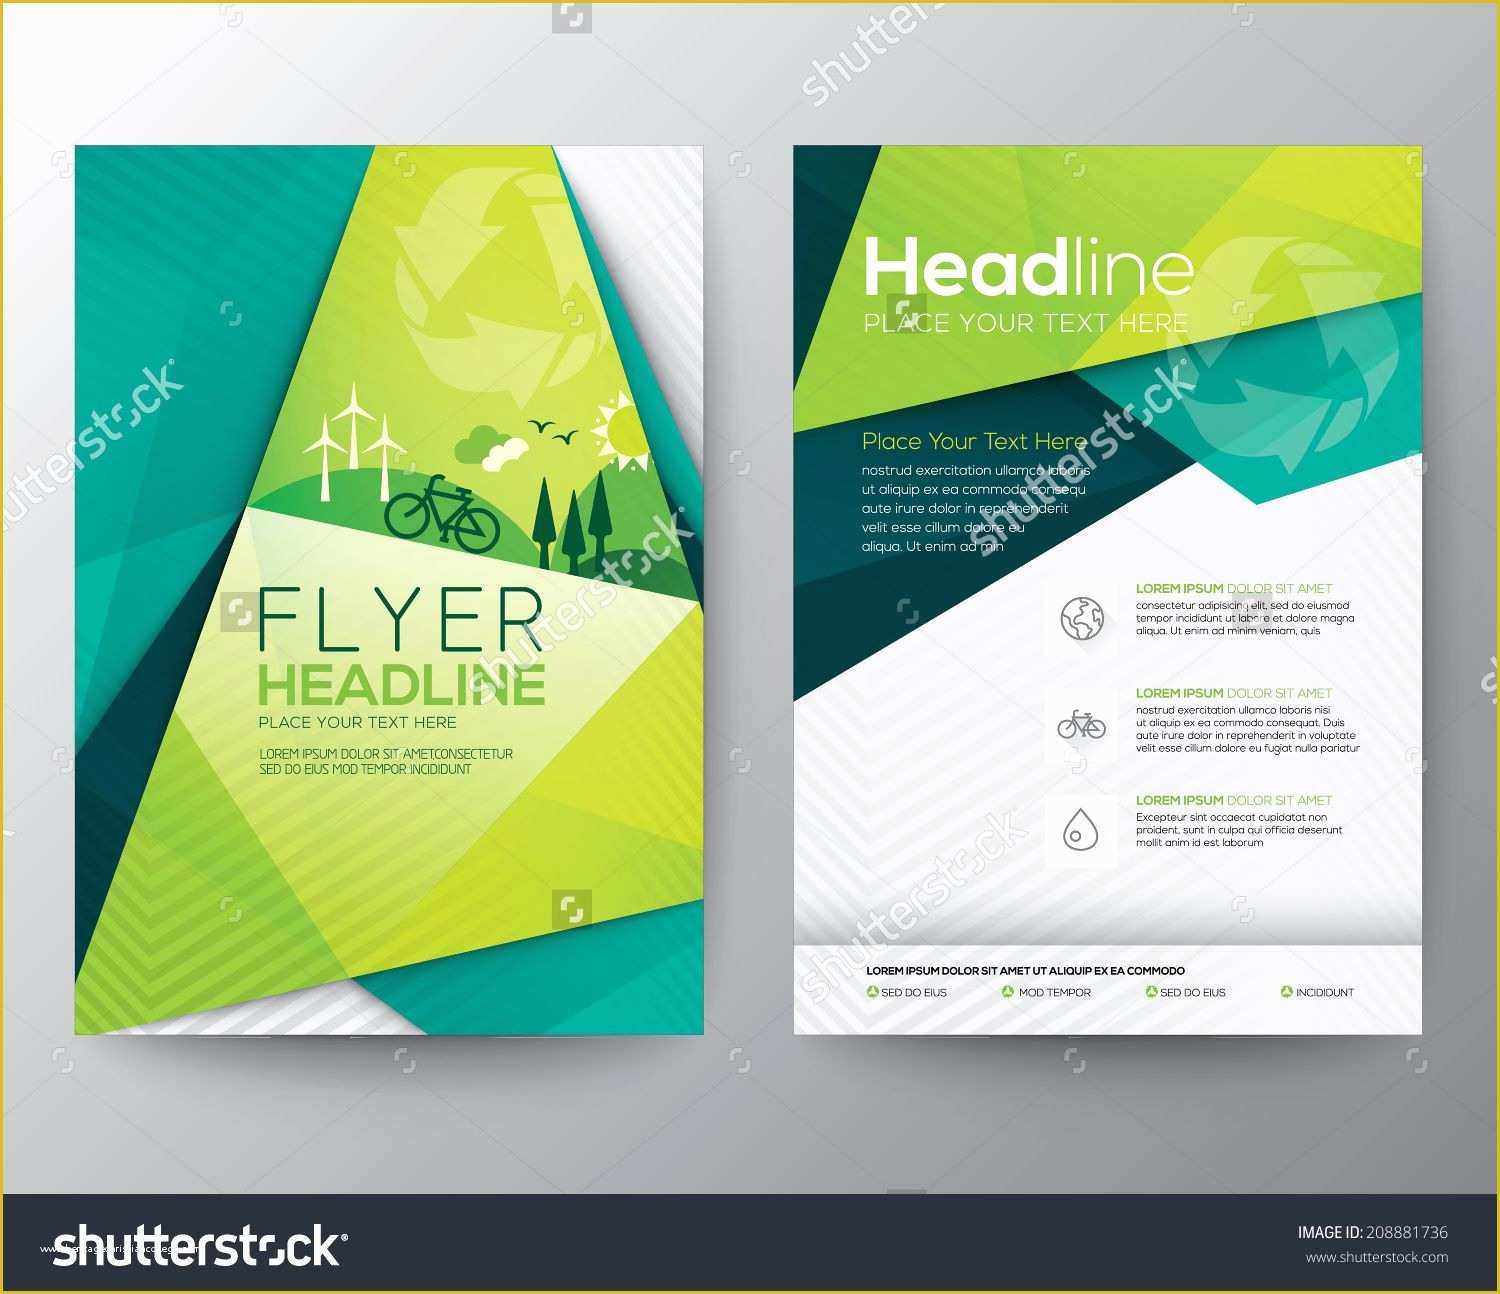 Free Online Mailer Design Templates Of Abstract Triangle Brochure Flyer Design Vector Template In